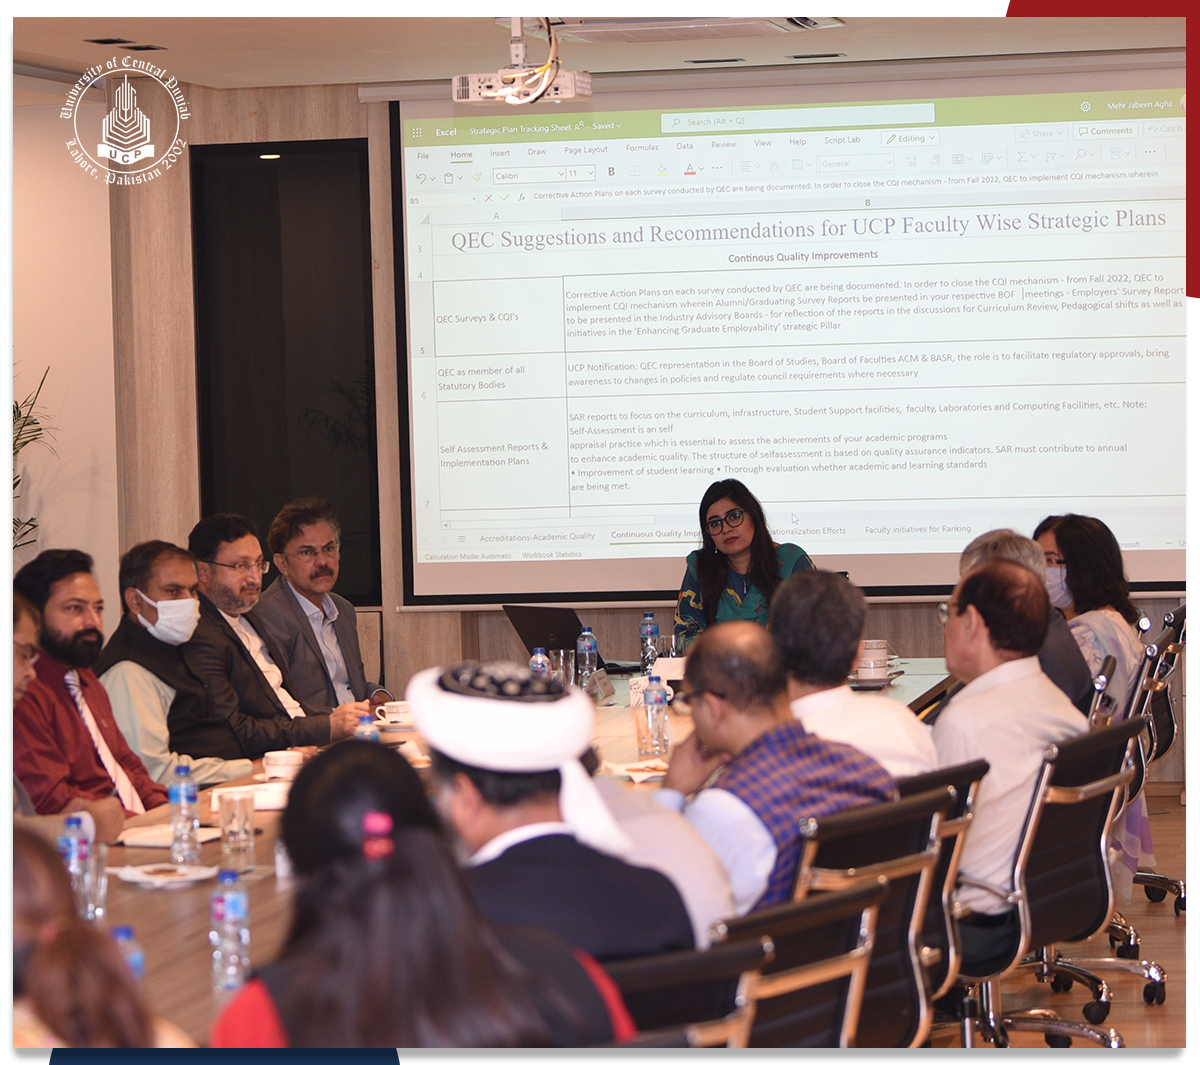 Pursuing World University Ranking, QEC conducts internationalization and Continuous Quality Improvement workshop